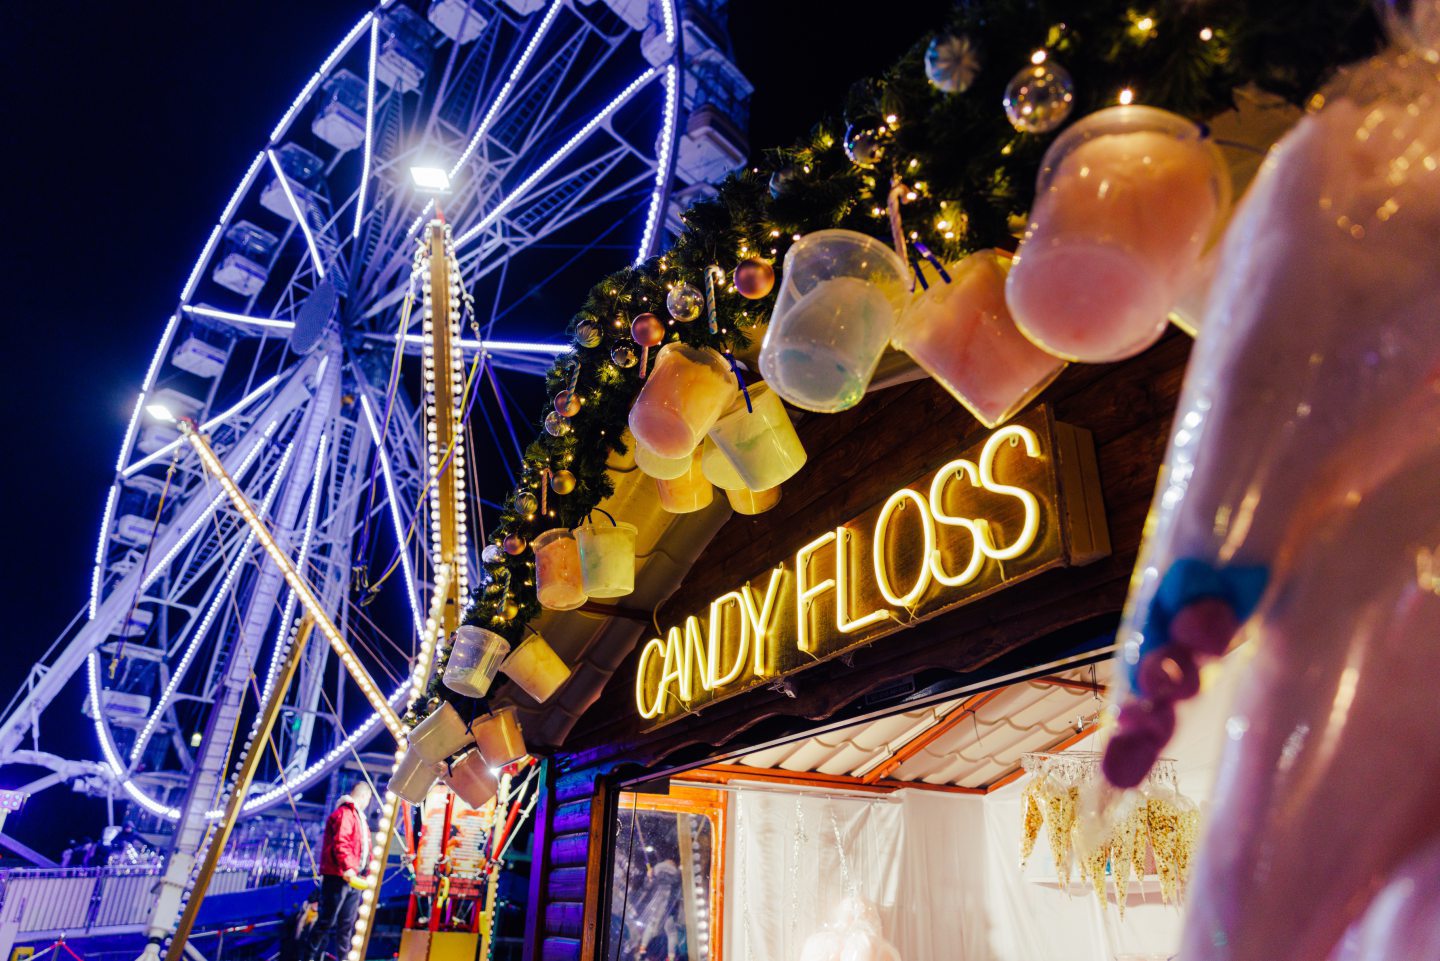 The Candy Floss bar at Dundee's Winterfest in 2022.